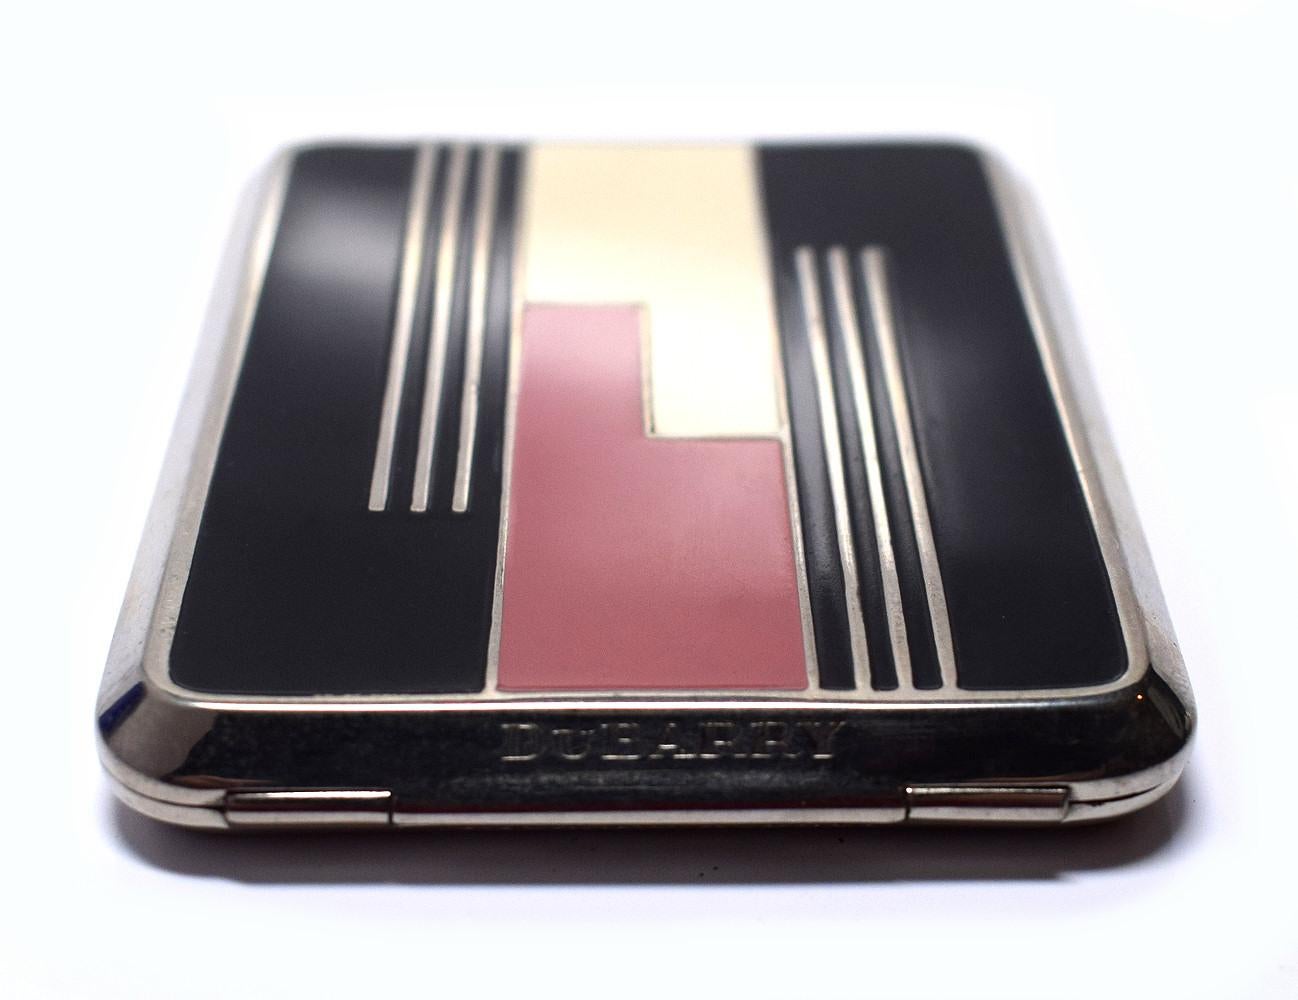 Early 1930's Art Deco Richard Hudnut Du Barry powder compact with remnants of the fine texture face powder in two-tones of bright red. Du Barry scent is still detectable despite the age of the powder. The back of the compact is engine turned with